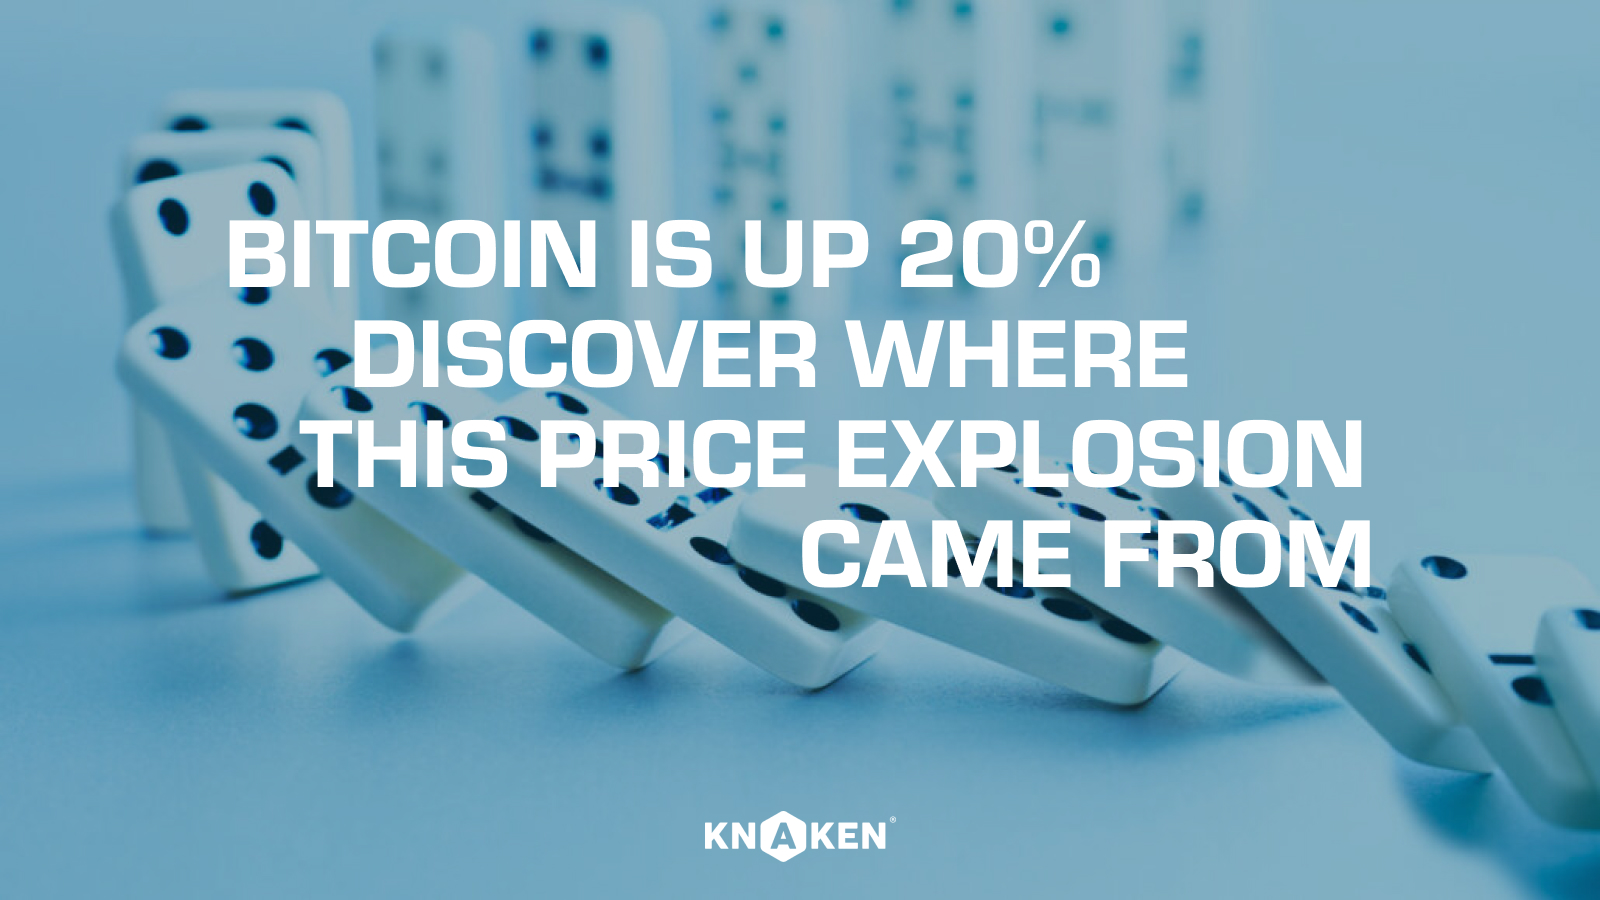 Bitcoin is 20% up! Discover where this price explosion came from